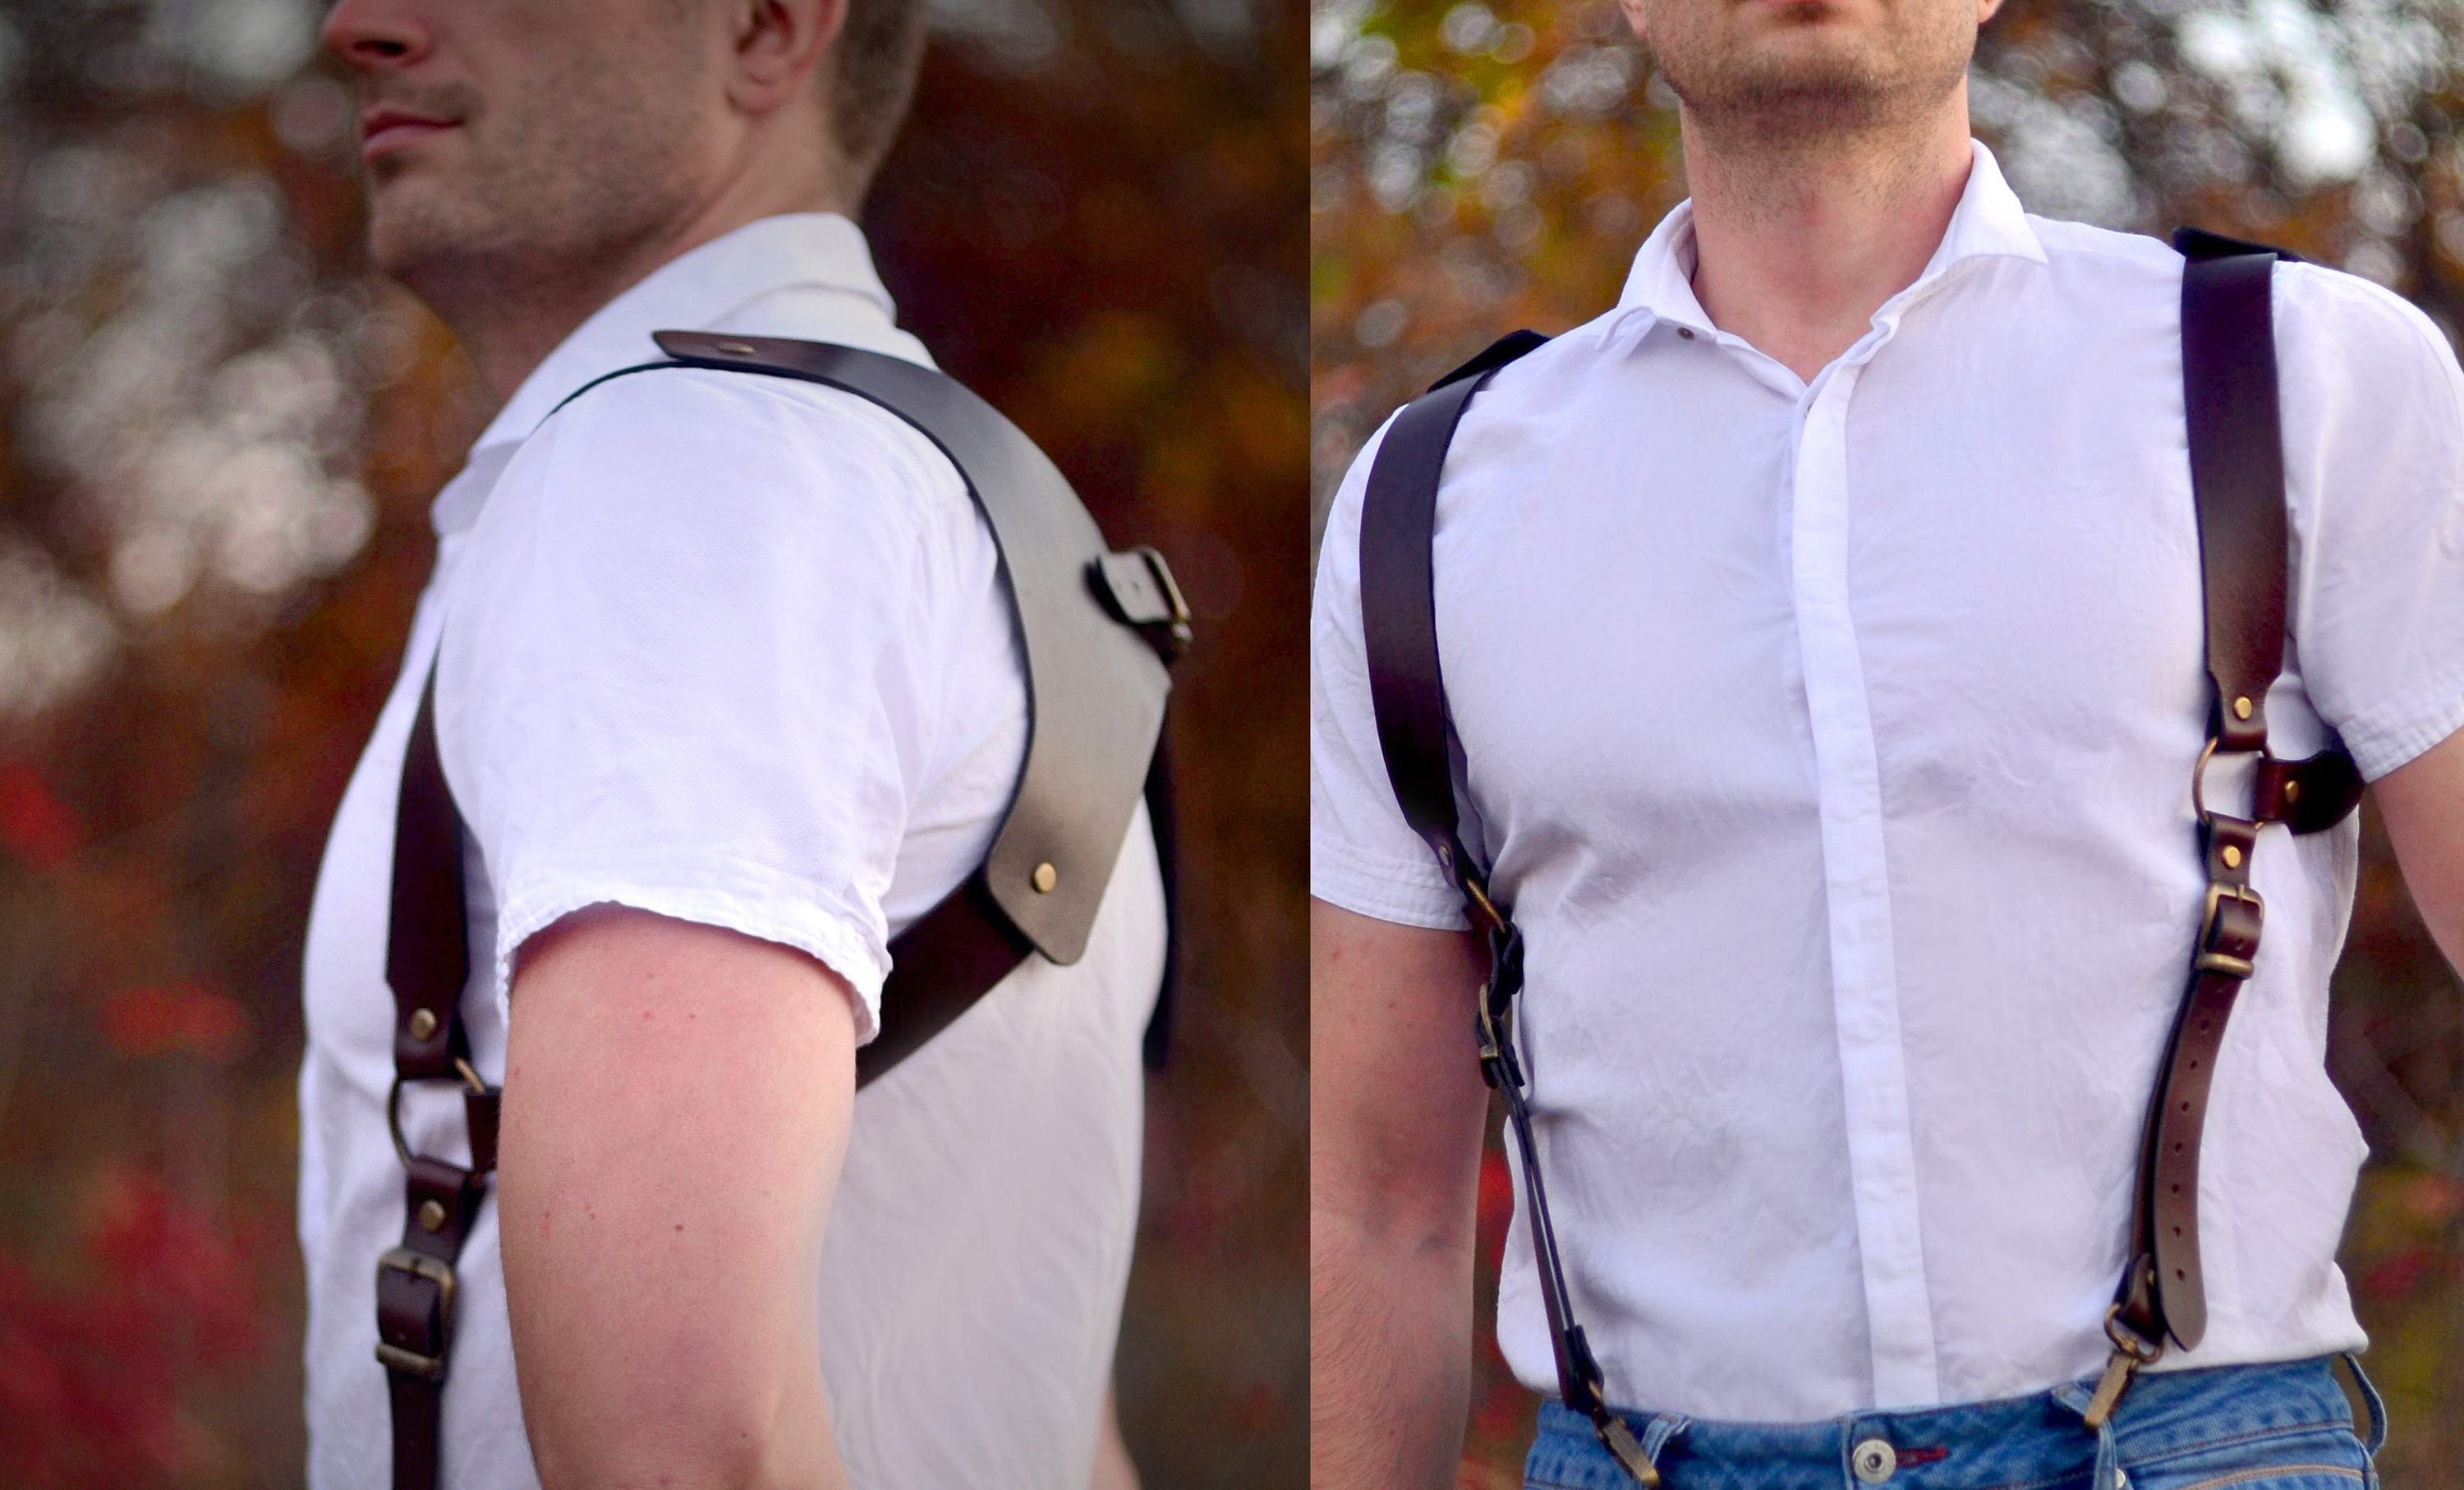 Leather Harness Suspenders for Men - DIFFERIO